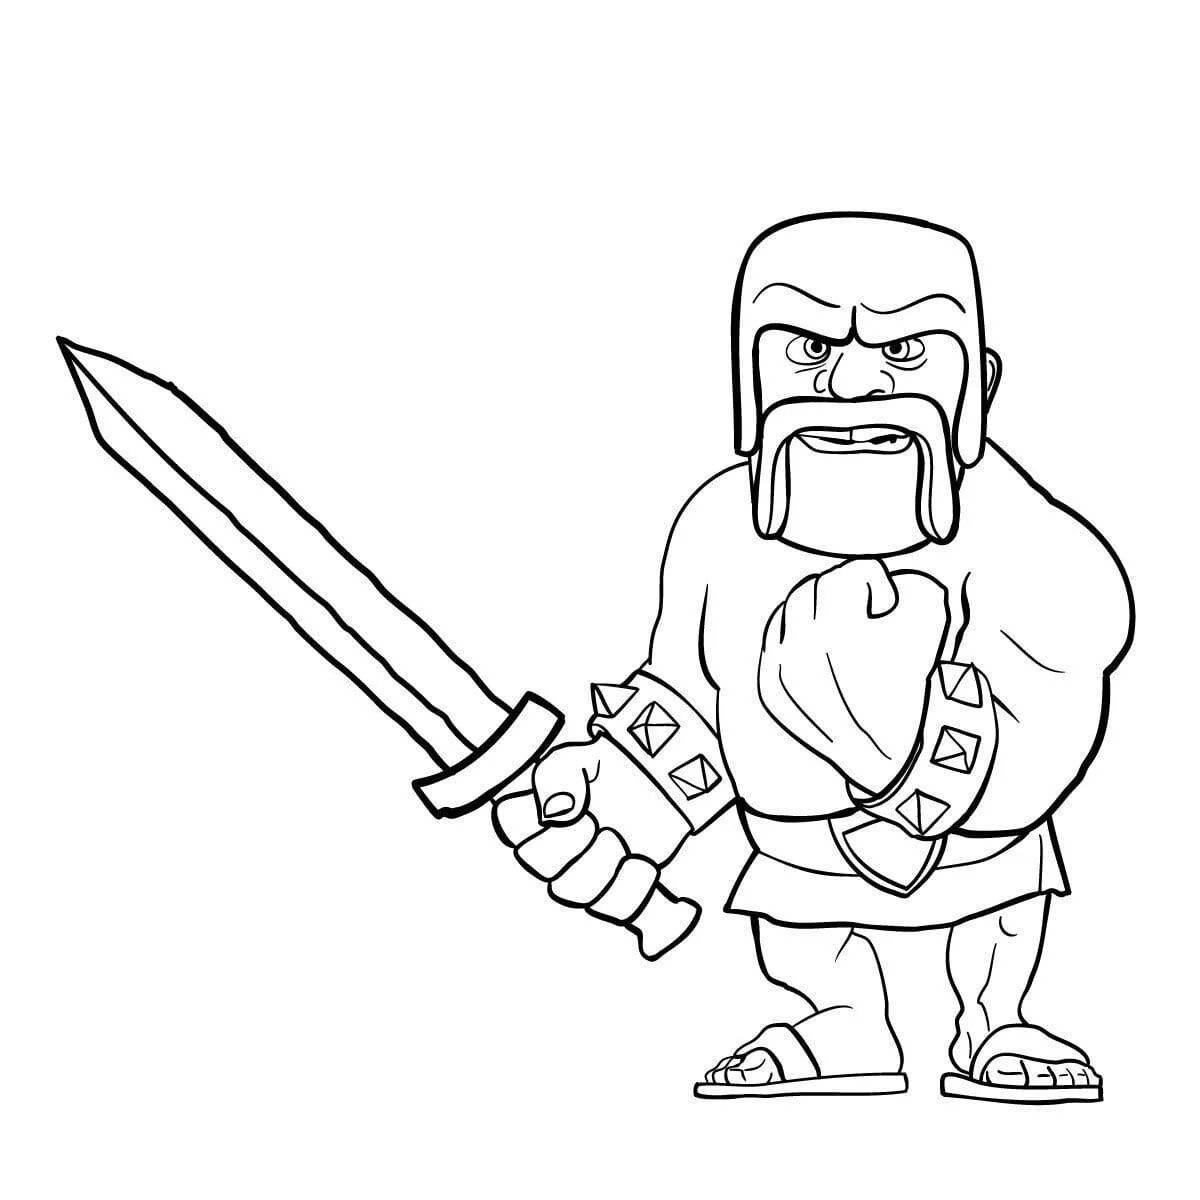 Clash of clans wonderful coloring book